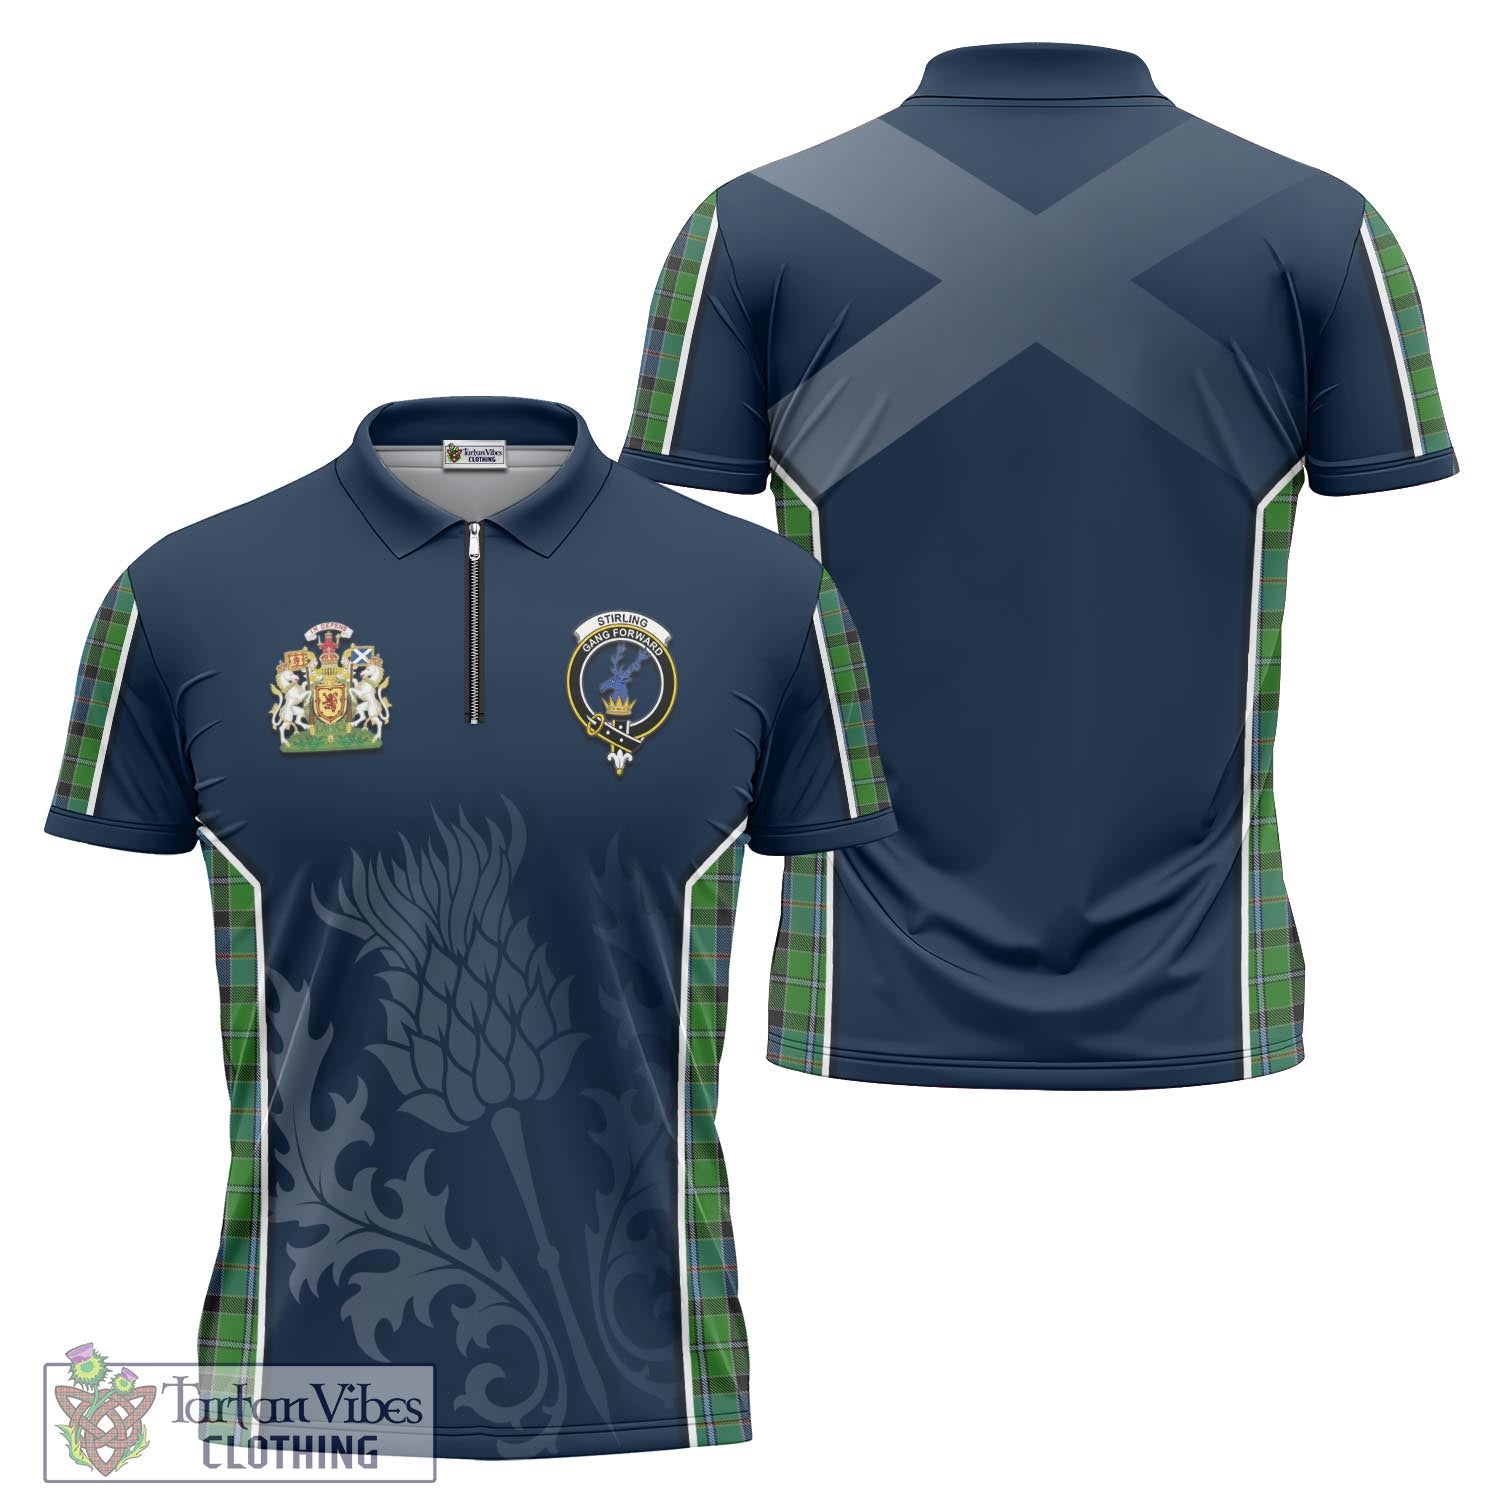 Tartan Vibes Clothing Stirling Tartan Zipper Polo Shirt with Family Crest and Scottish Thistle Vibes Sport Style